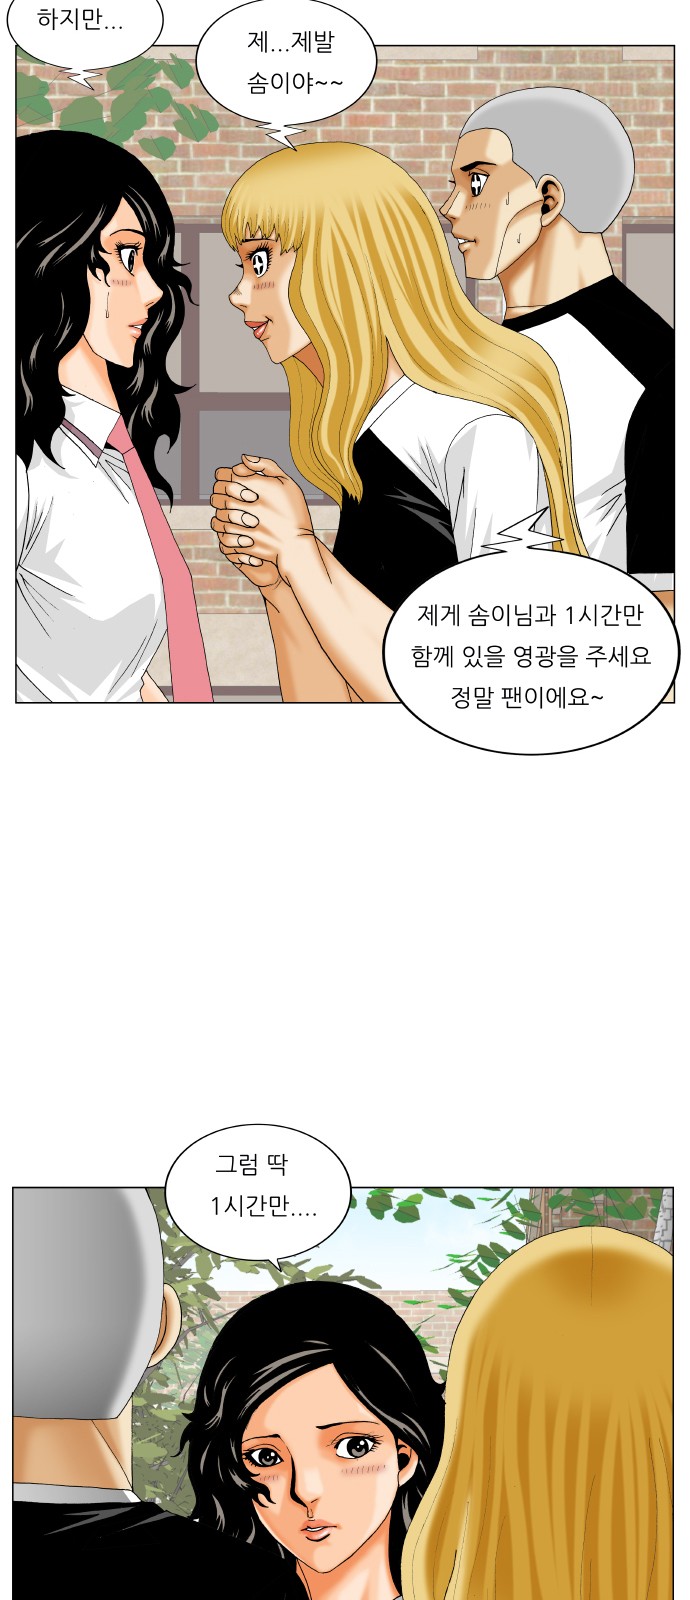 Ultimate Legend - Kang Hae Hyo - Chapter 286 - Page 3